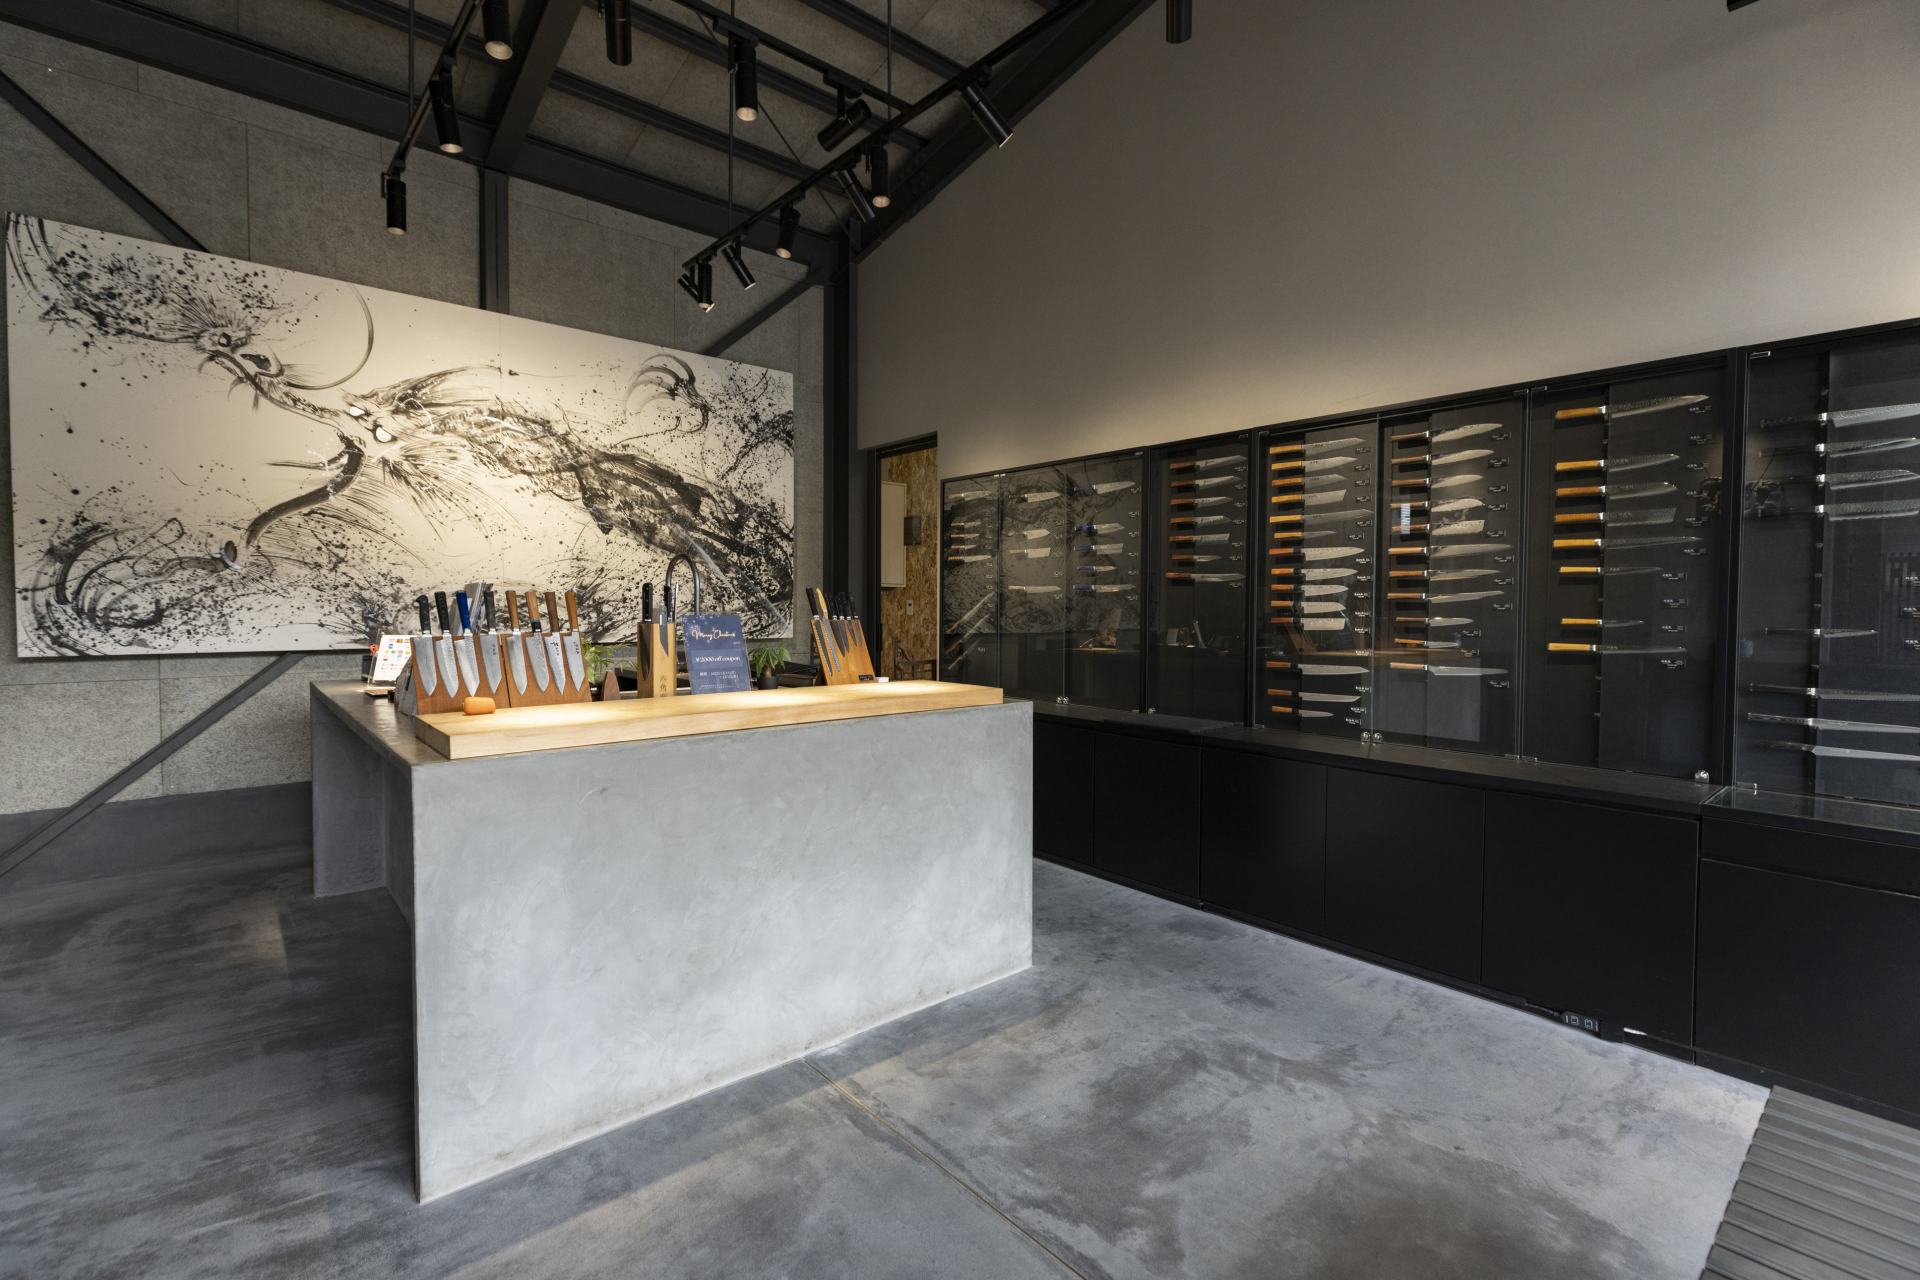 The wide selection of knives and the dragon ink painting leave an impression on visitors as soon as they enter the Ryusen studio.